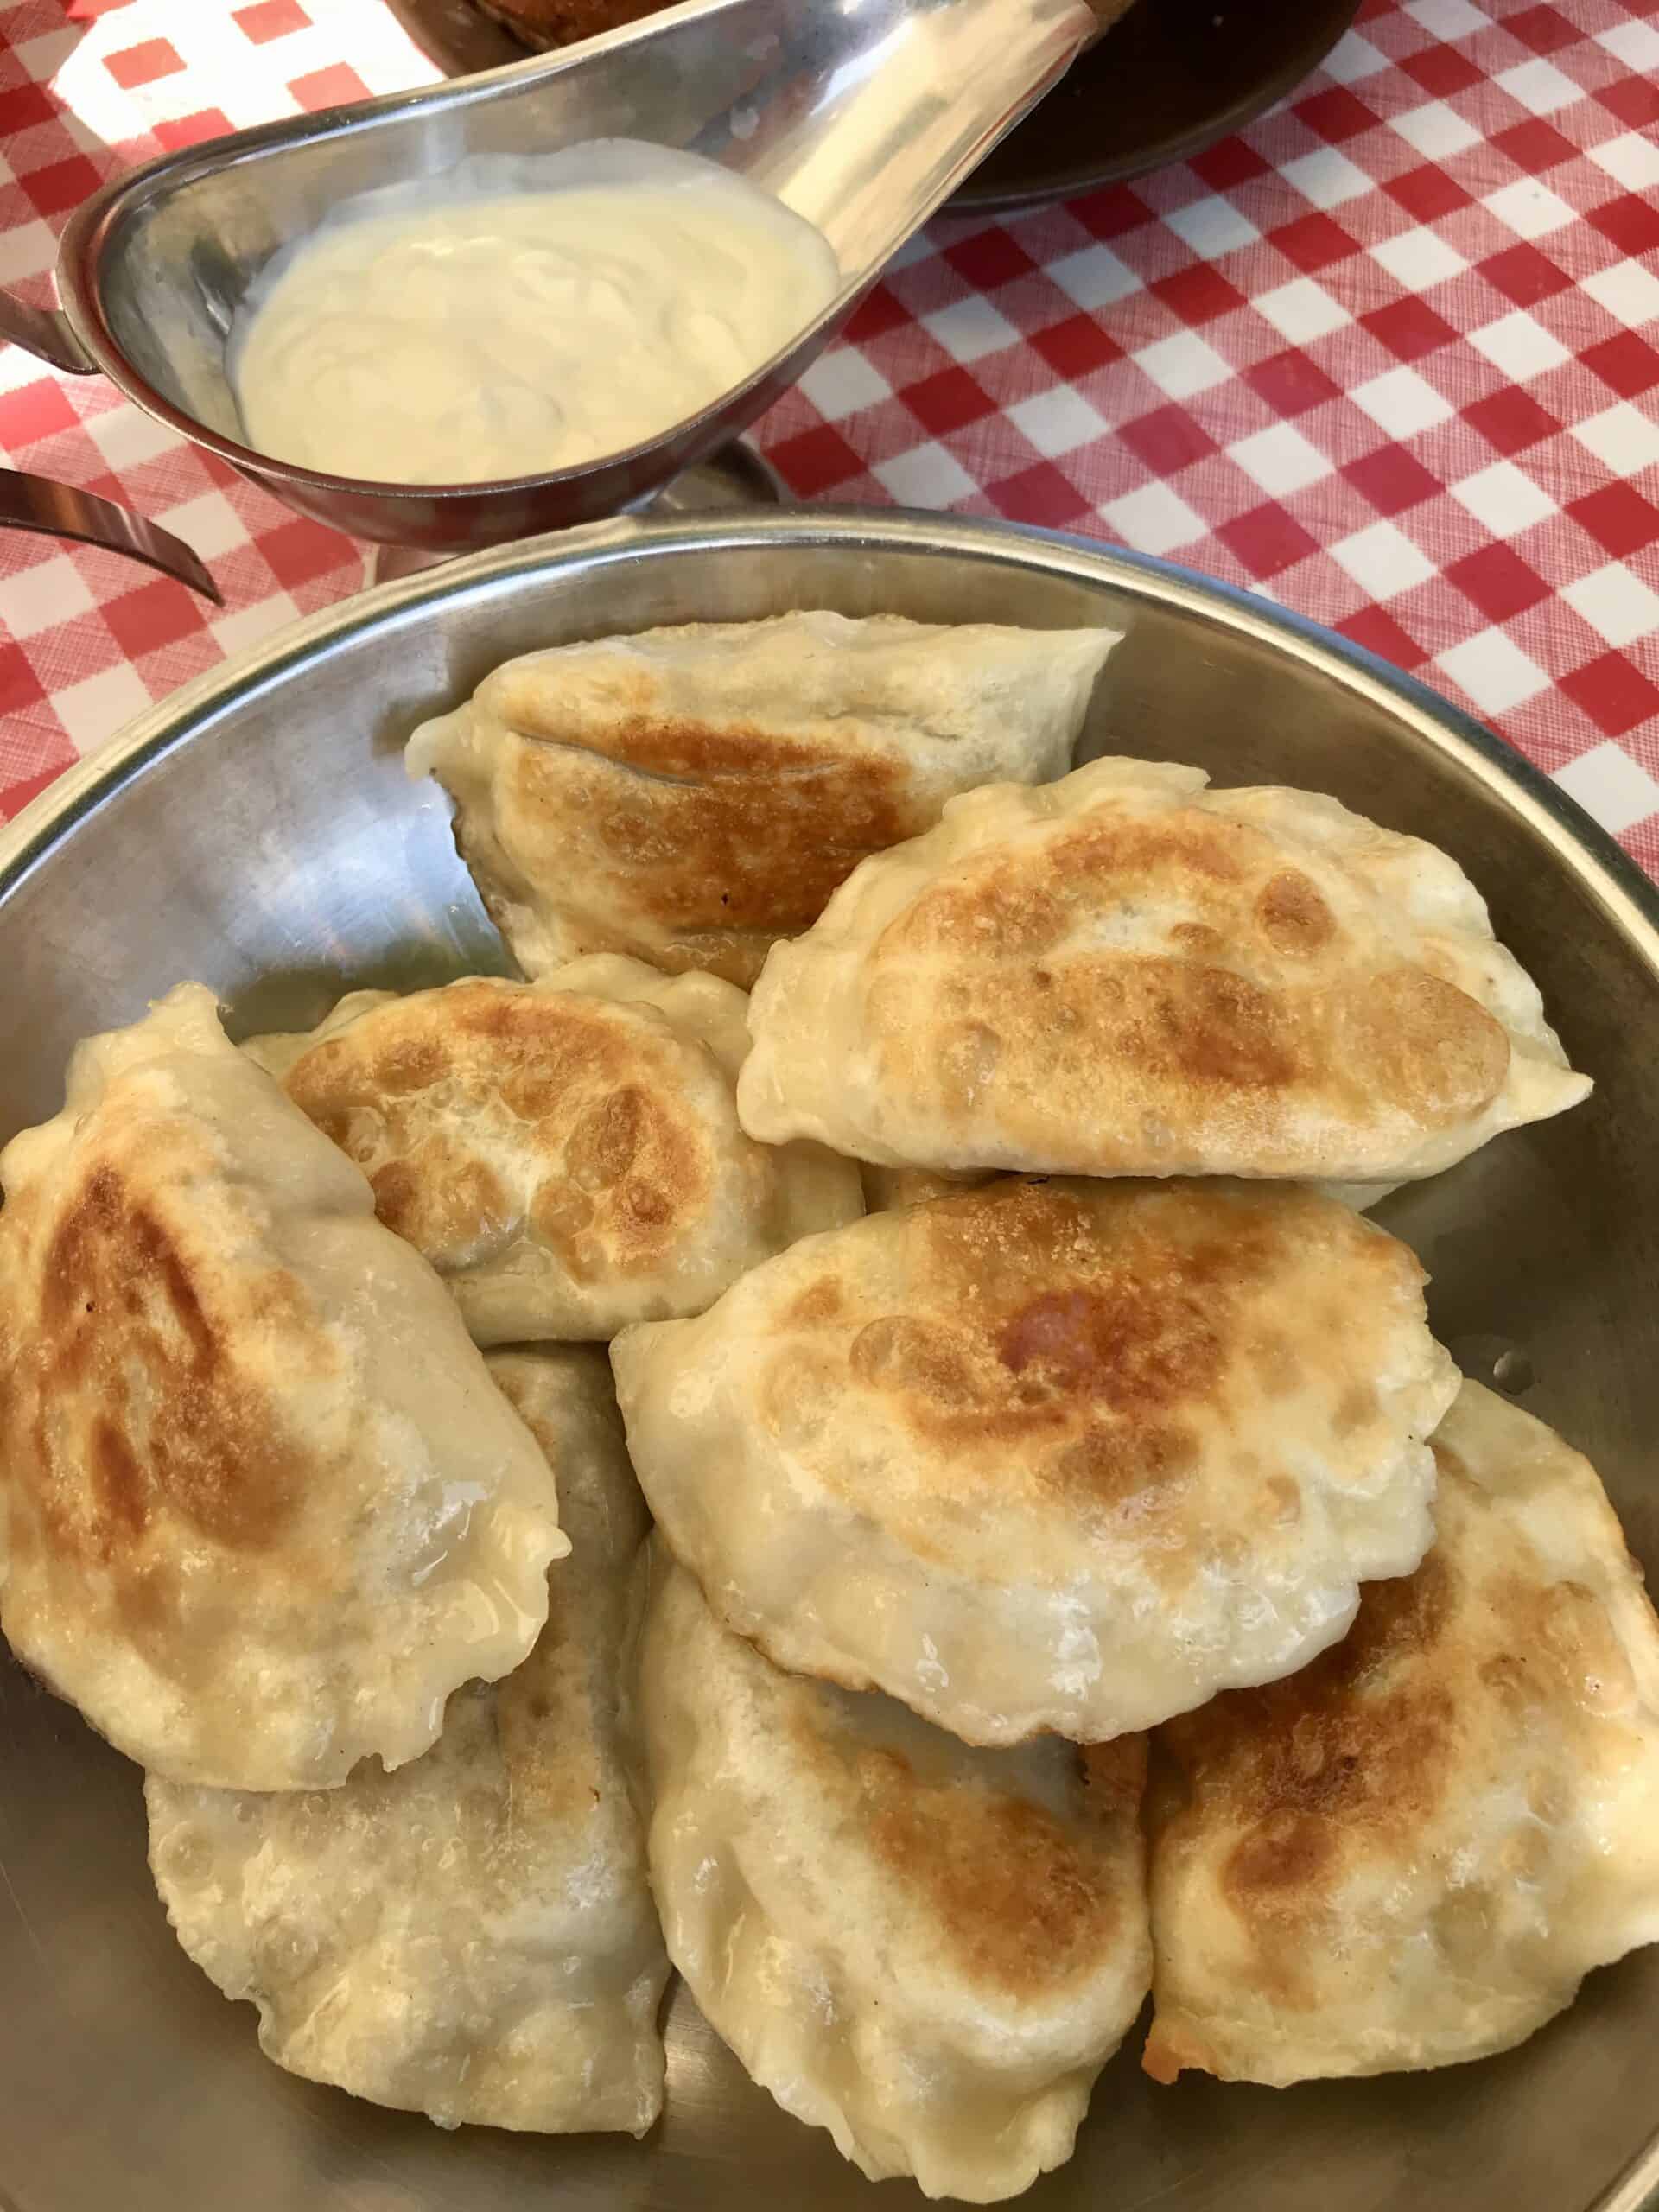 Know before you go - Pierogi is a delicious food in Poland